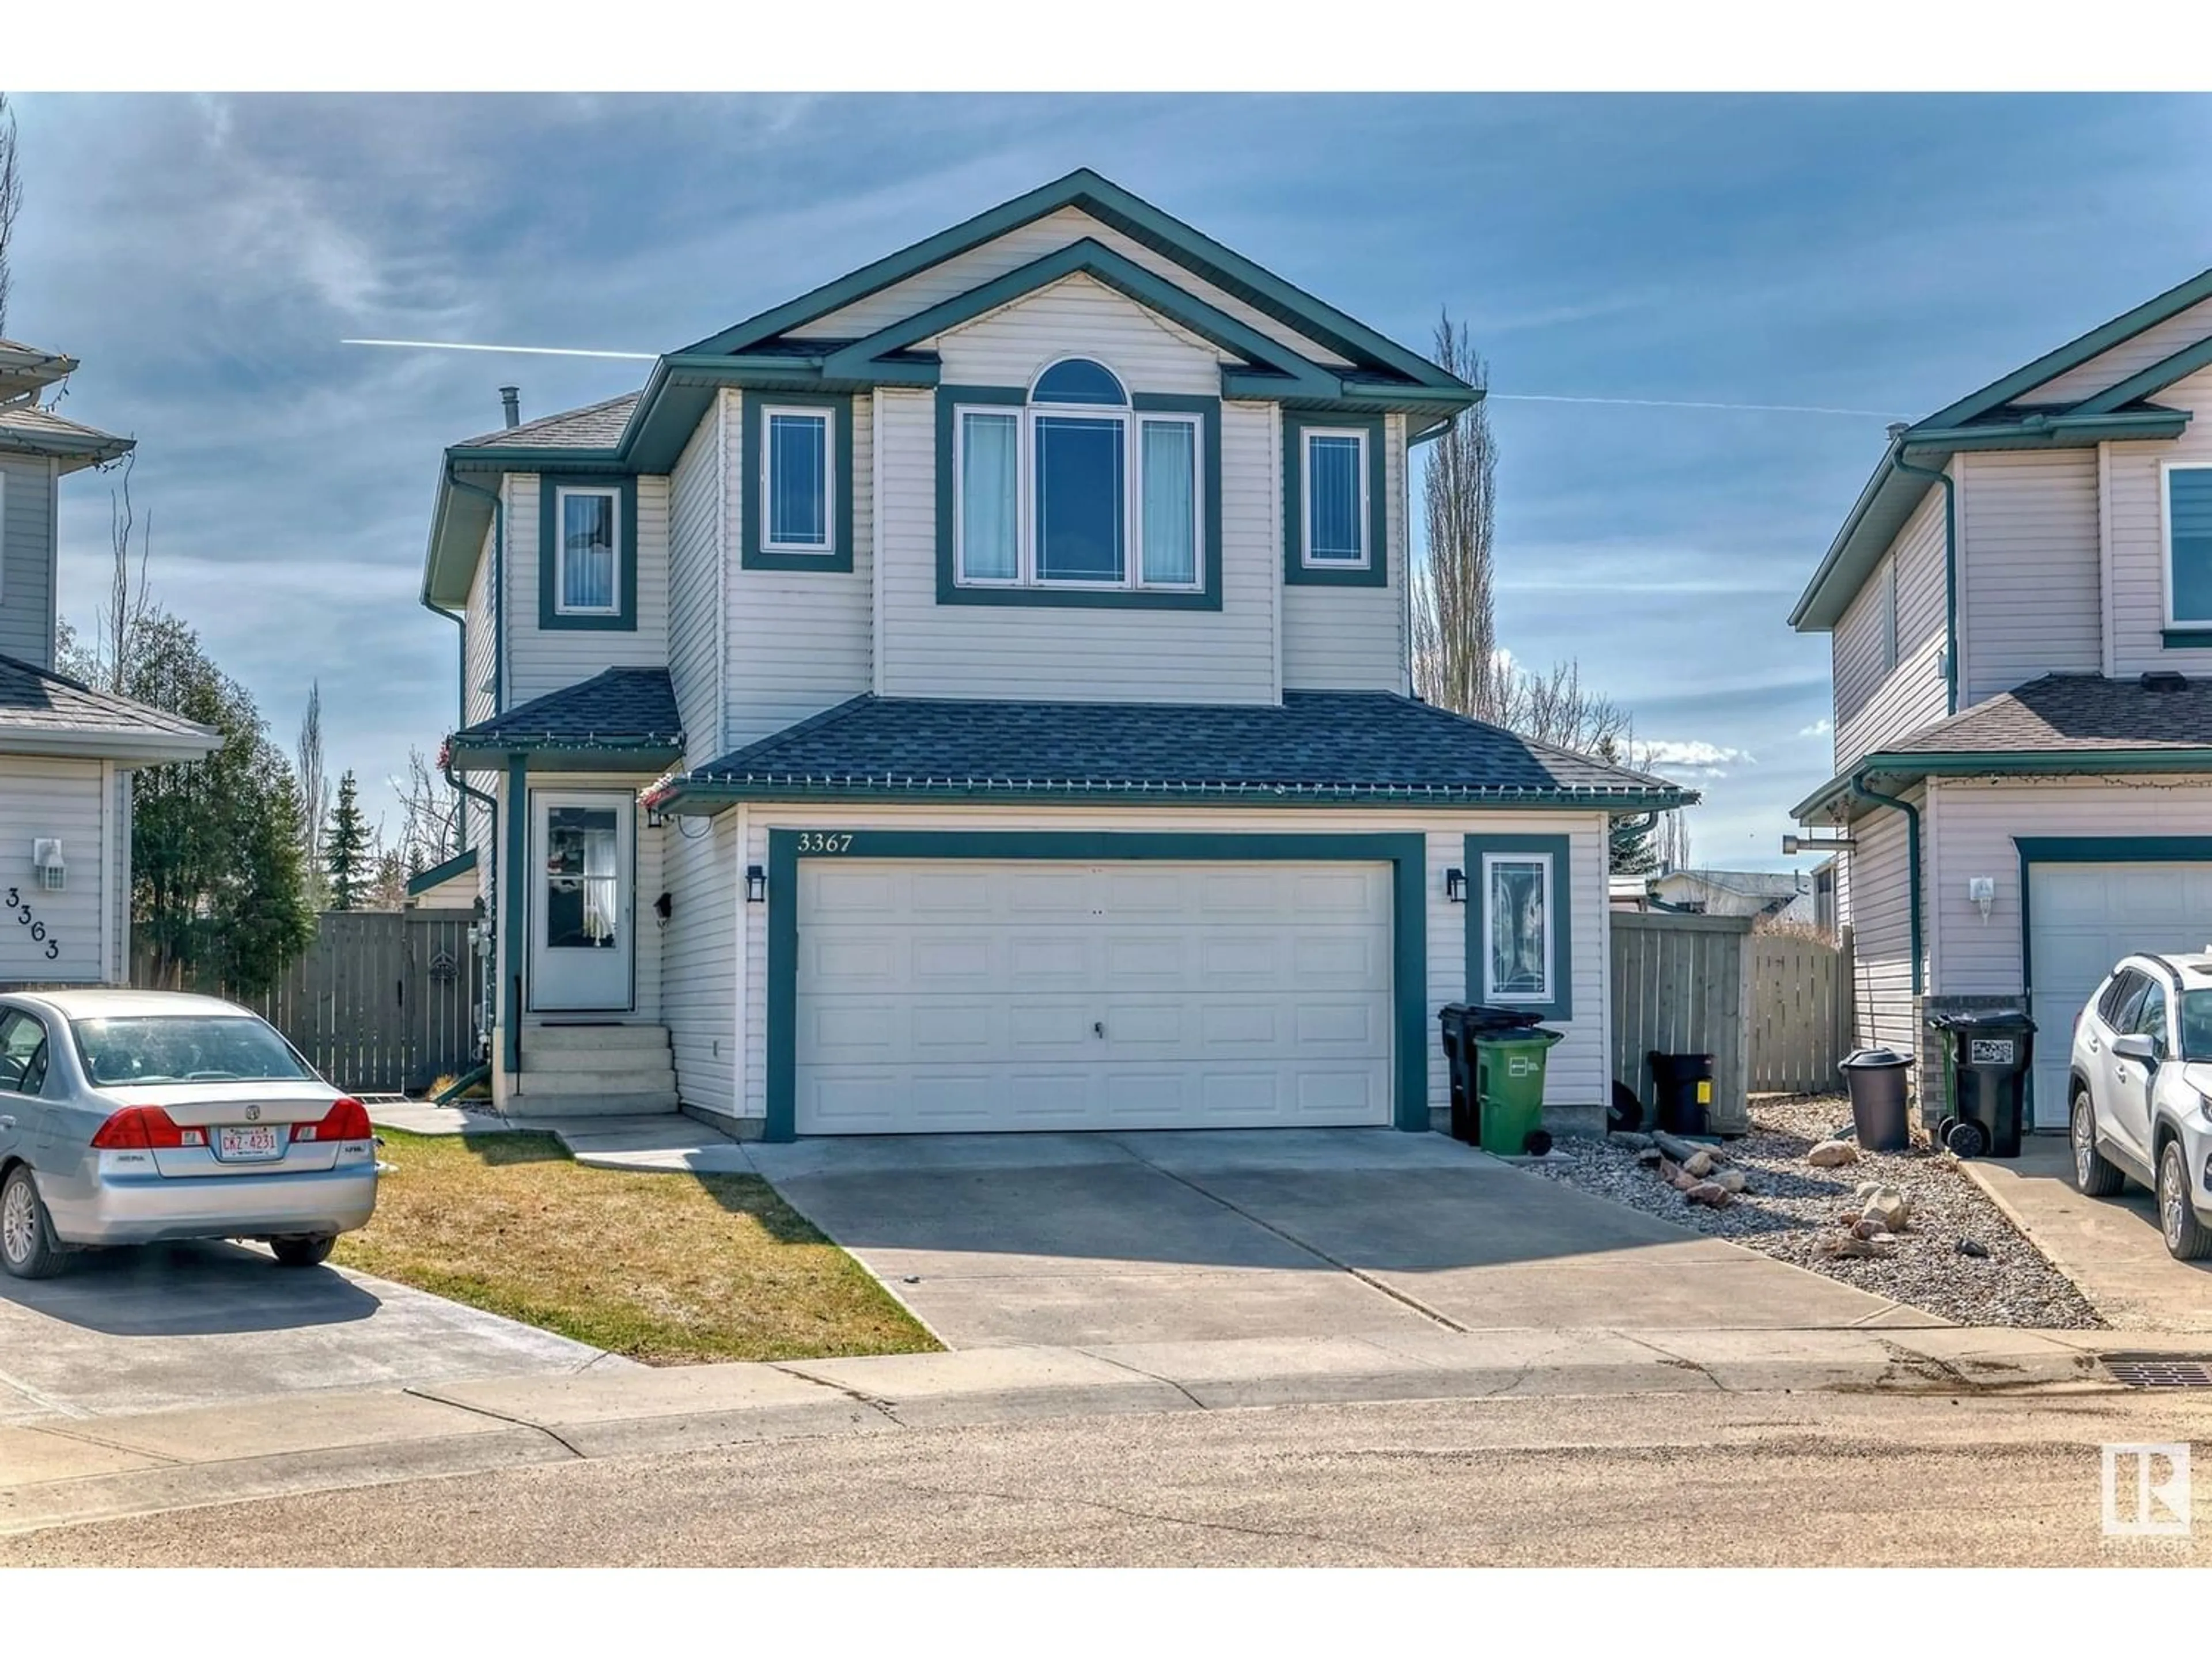 A pic from exterior of the house or condo for 3367 26 AV NW, Edmonton Alberta T6T1R1